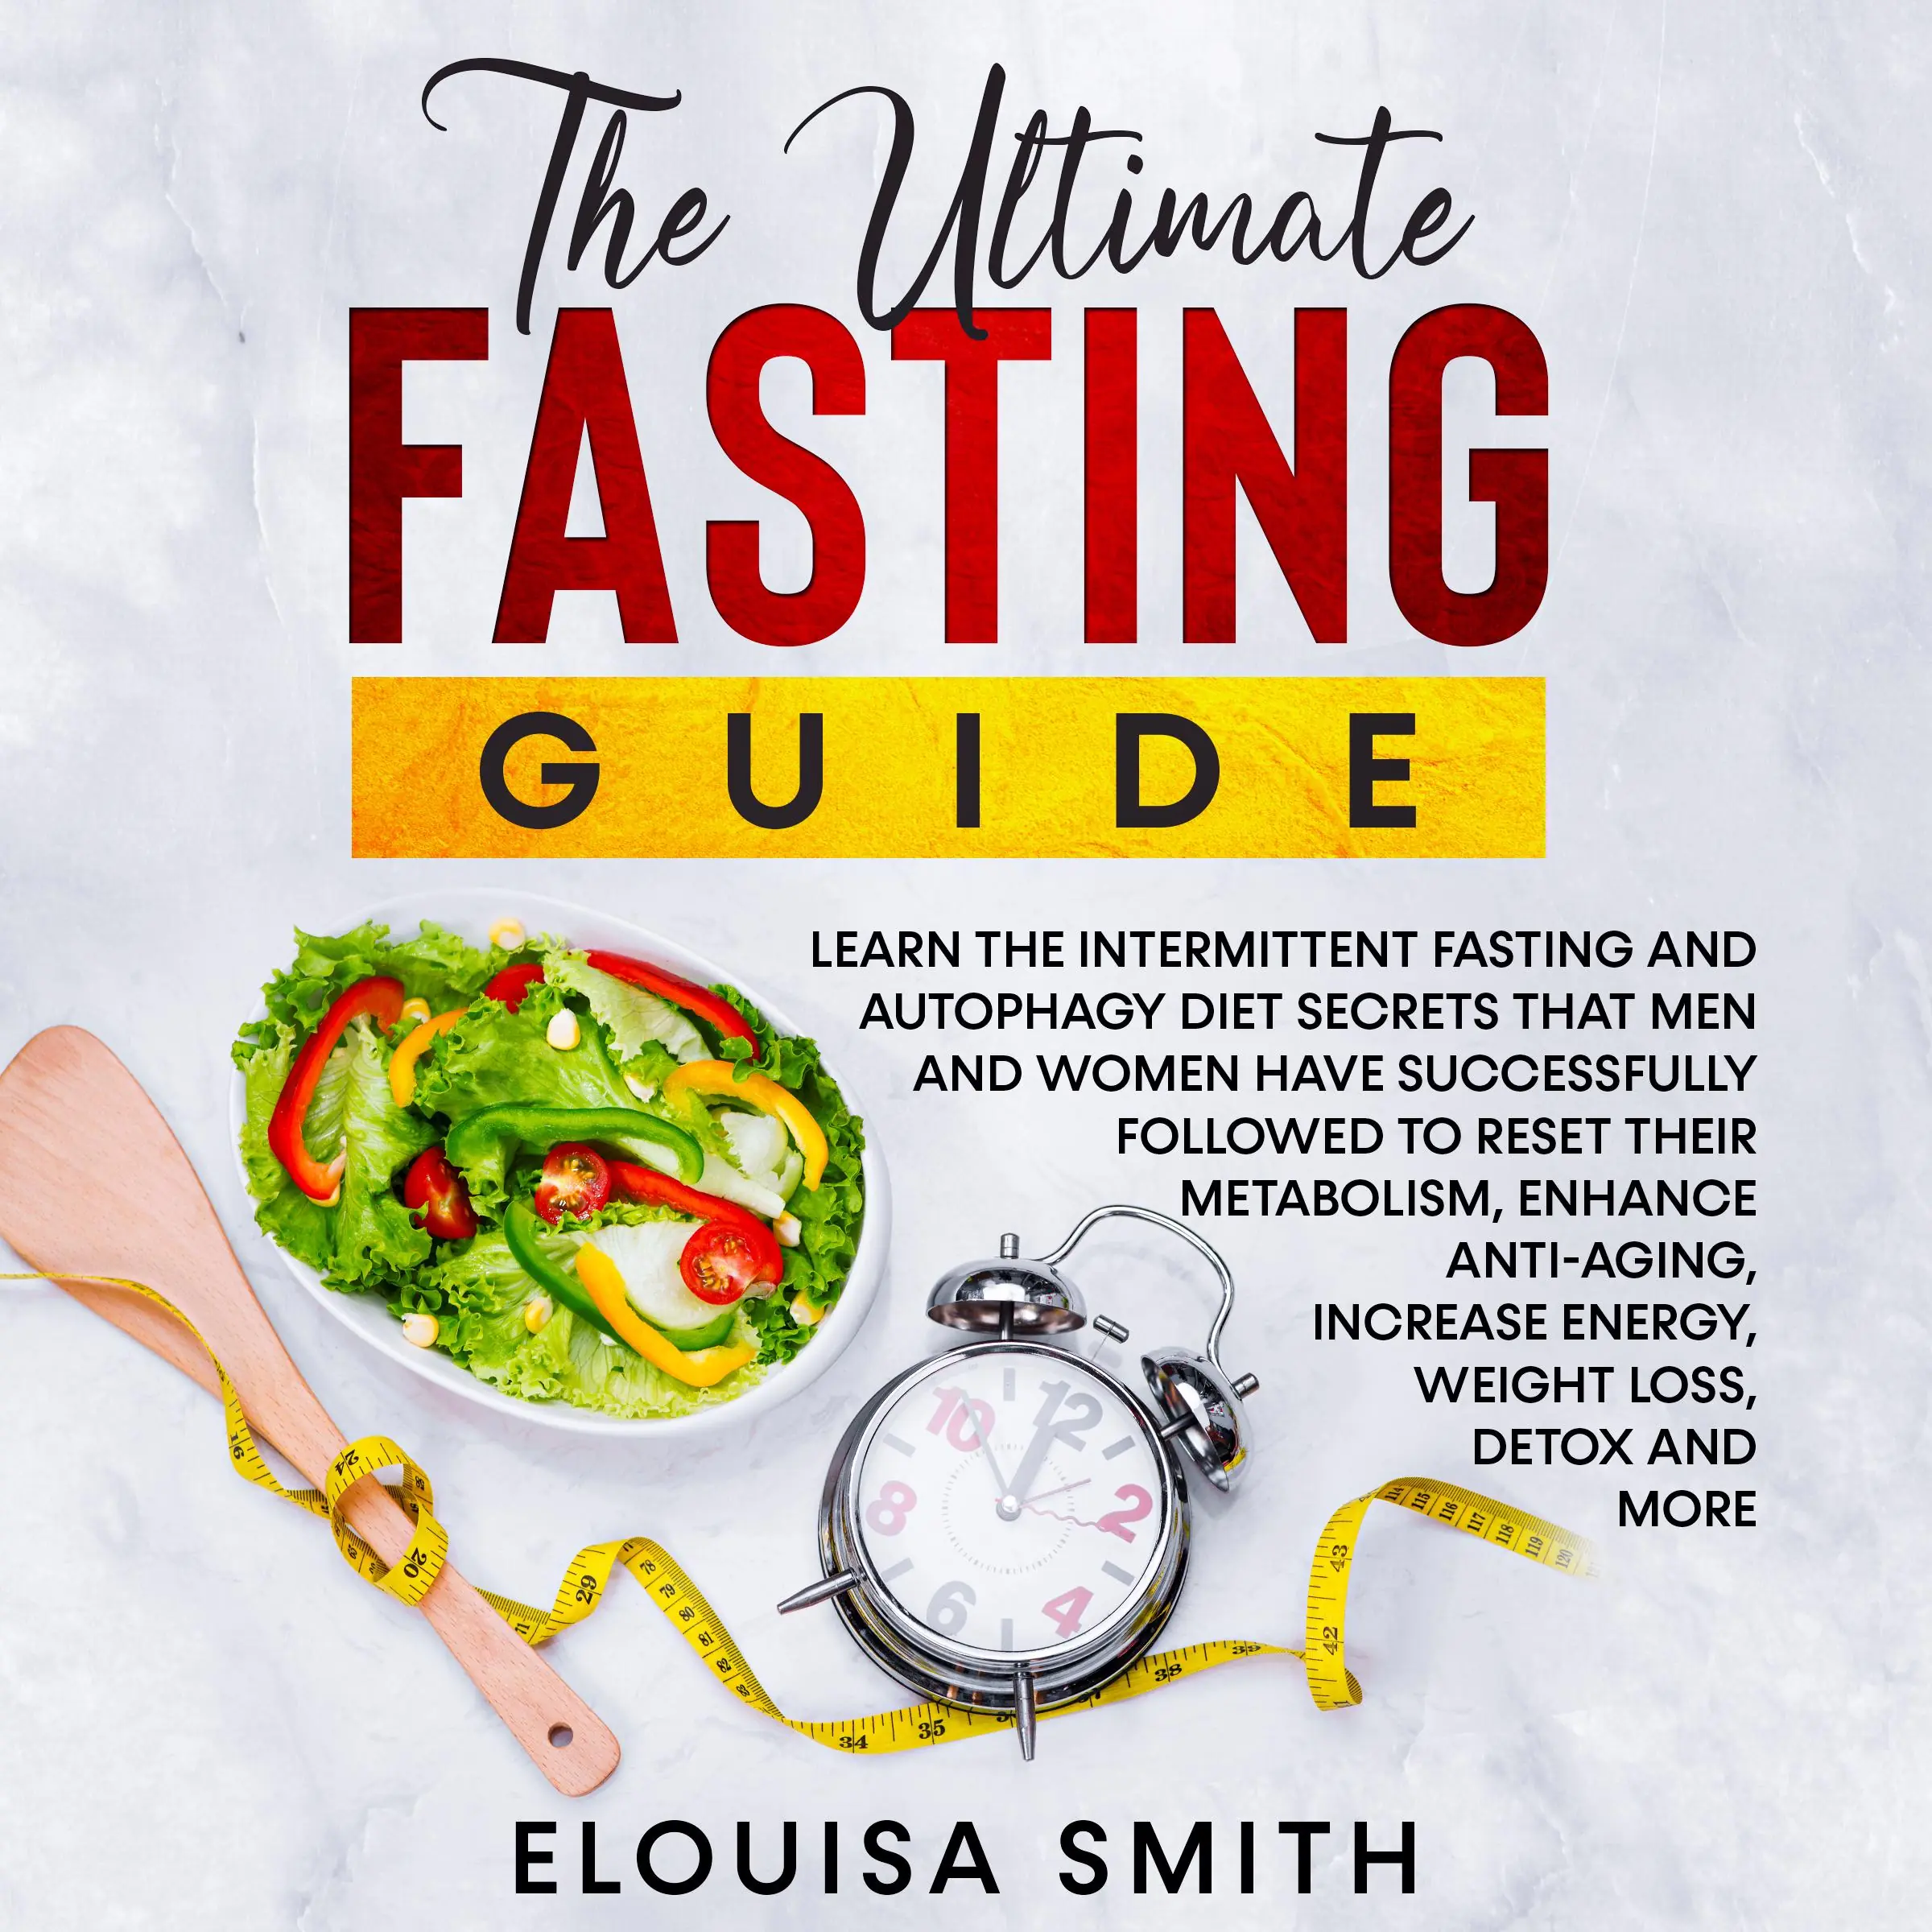 The Ultimate Fasting Guide: Learn the intermittent fasting and autophagy diet secrets that men and women have successfully followed to reset their metabolism, enhance anti-aging, increase energy, weight loss, detox and more Audiobook by Elouisa Smith